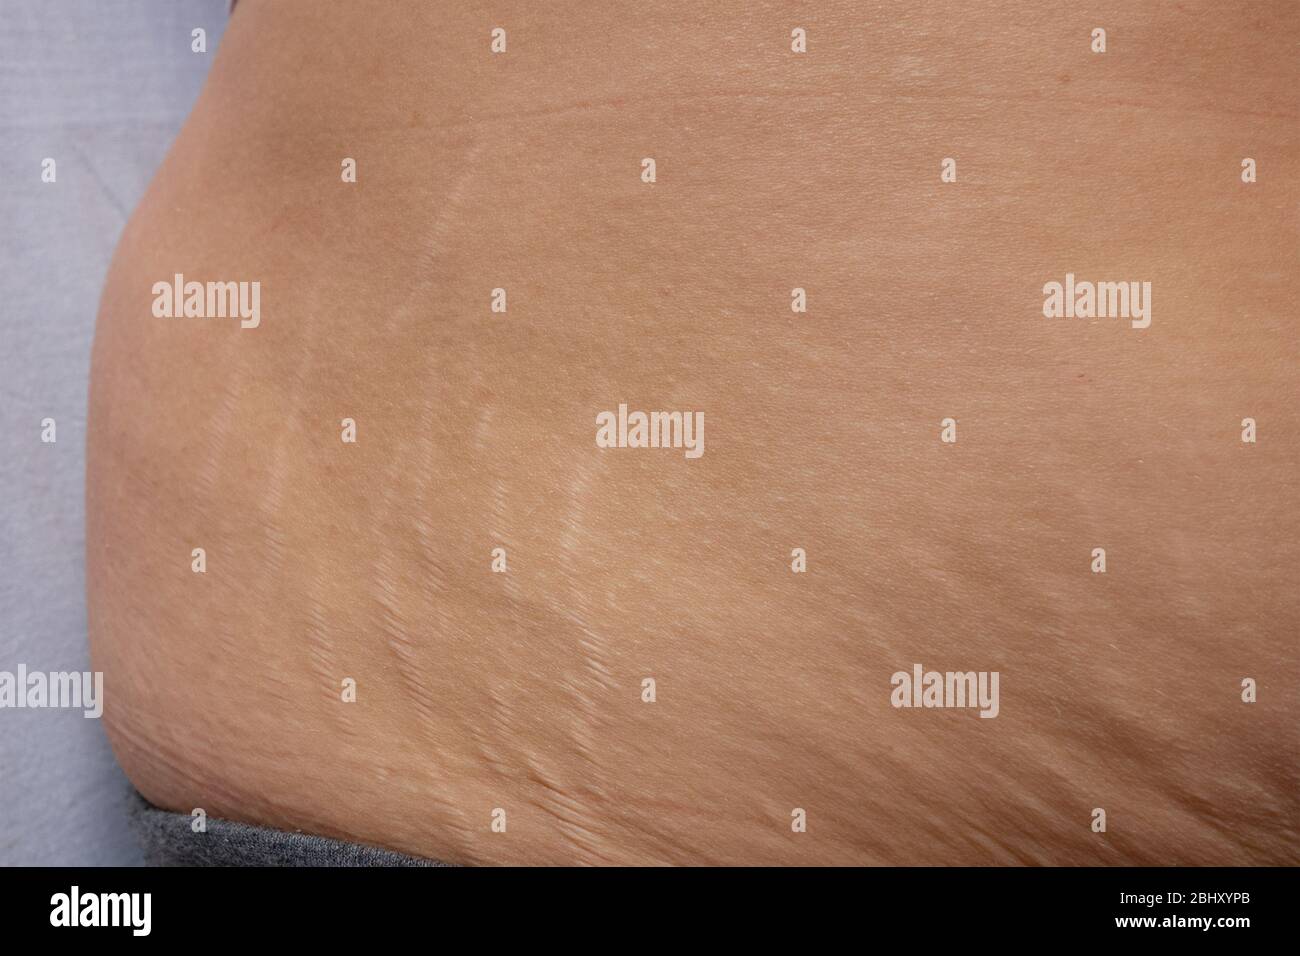 Postnatal changes as stretches on skin. After birth marks on belly of woman. Close-up view of postpartum stretches or age skin recovery Stock Photo